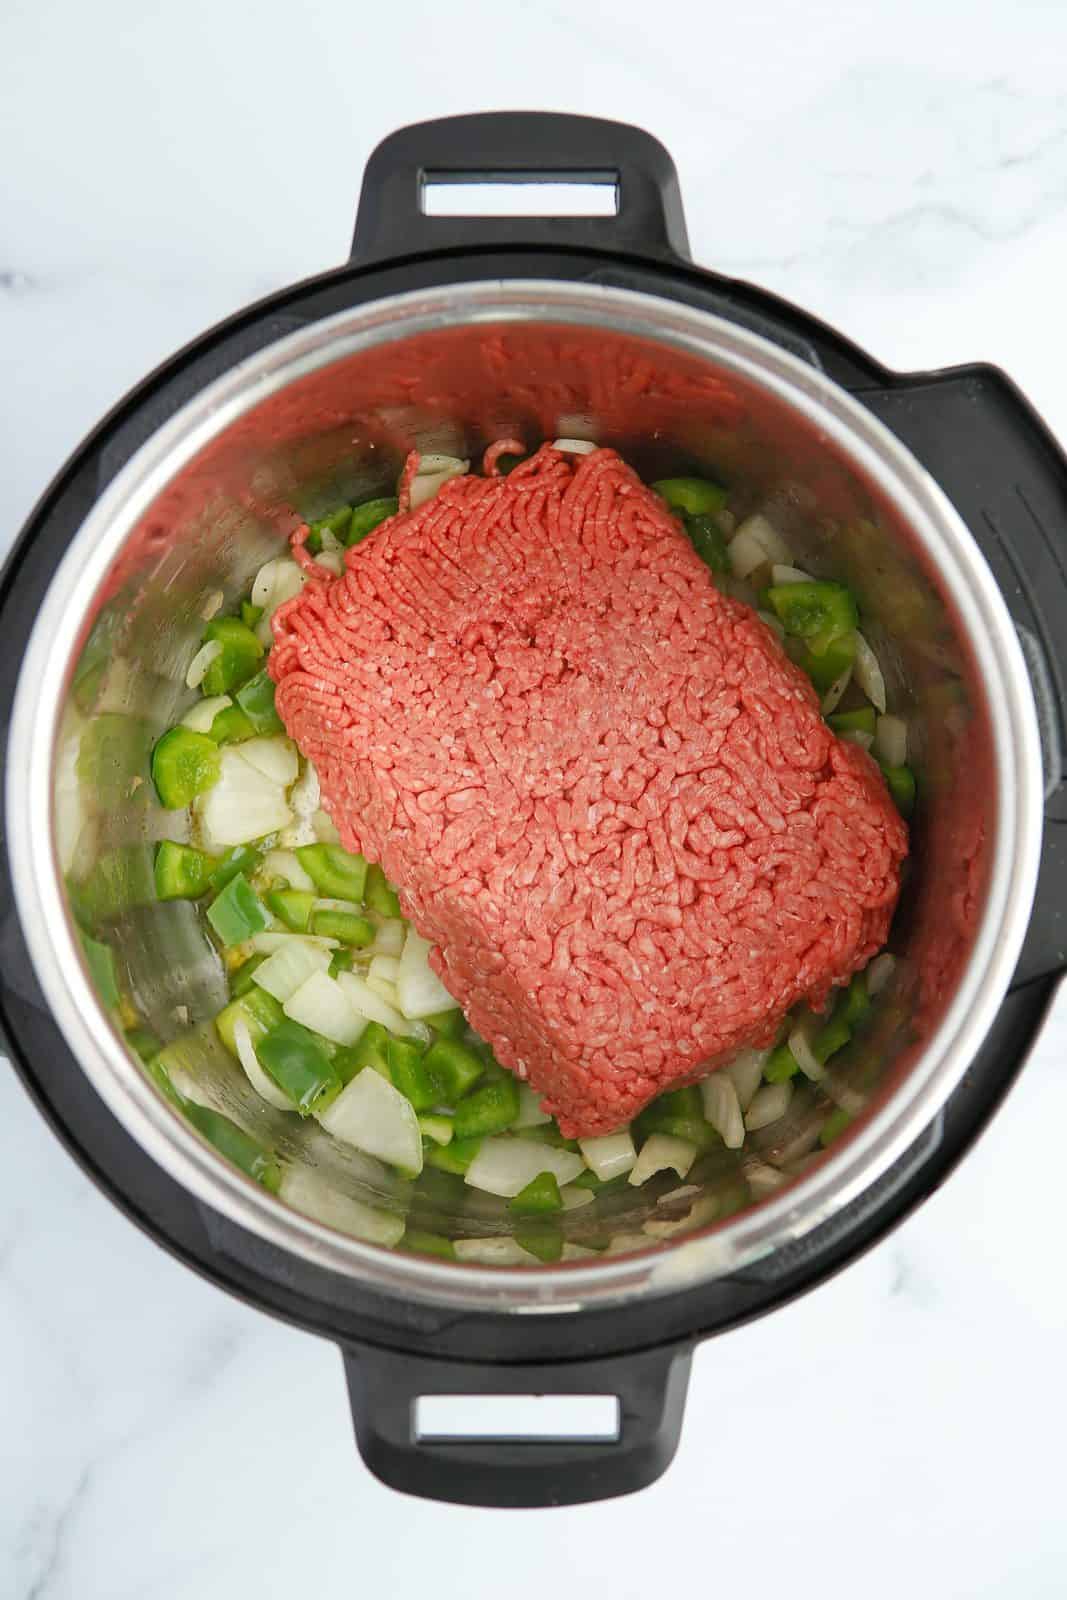 Onions, pepper and ground beef in instant pot.